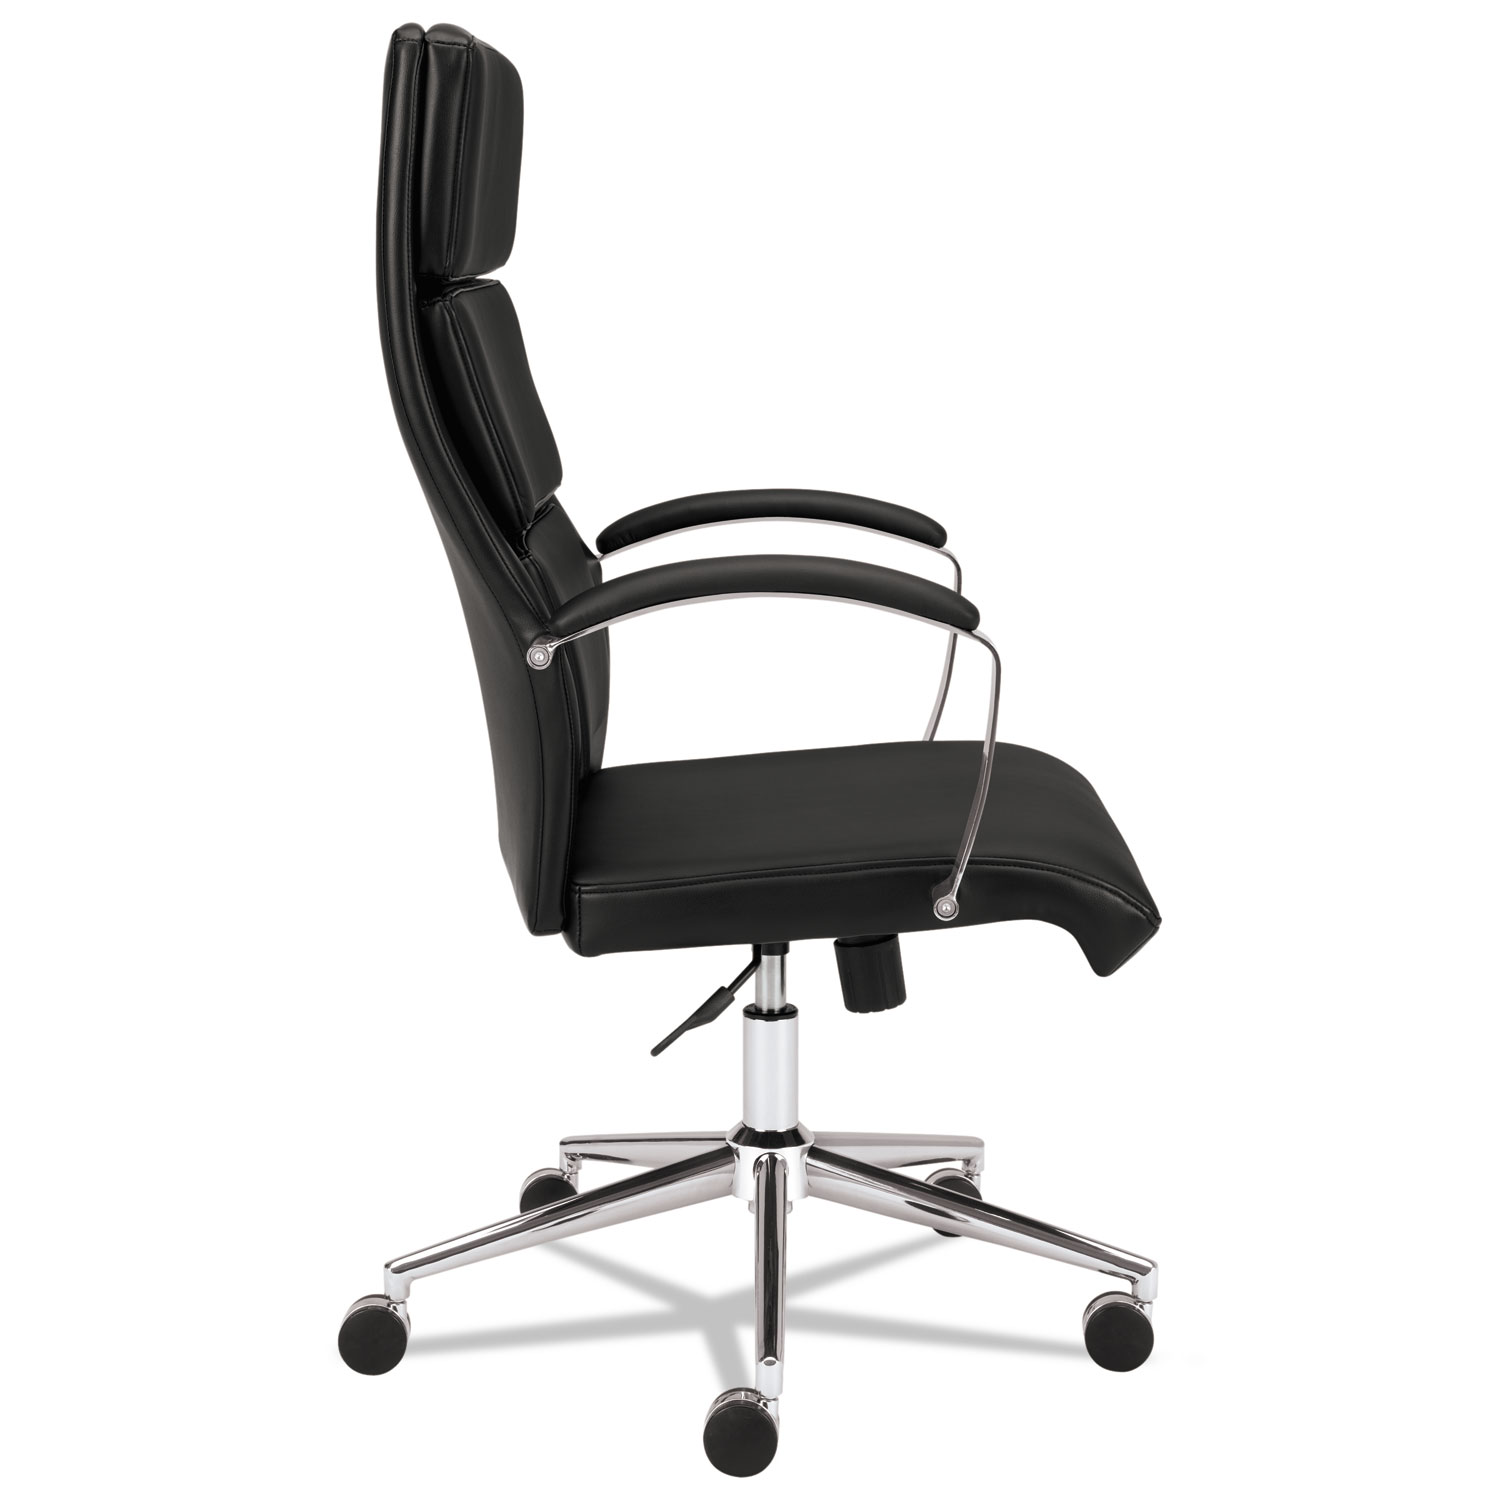 VL105 Series Executive High-Back Chair, Black Leather